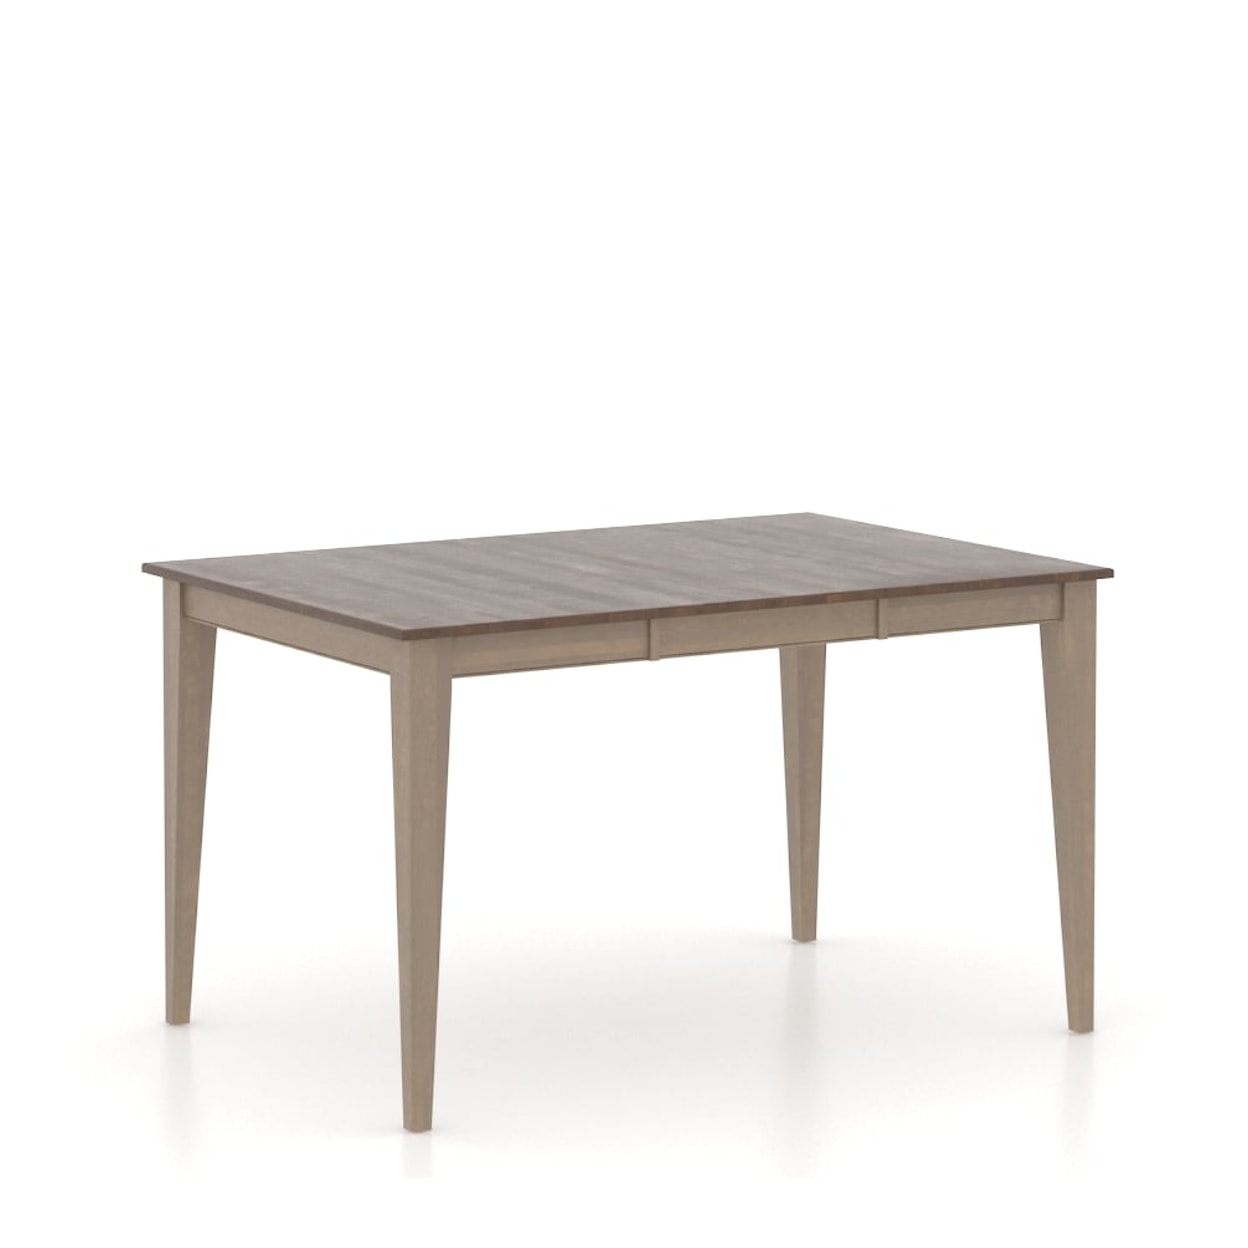 Canadel Gourmet Customizable Square Counter Table